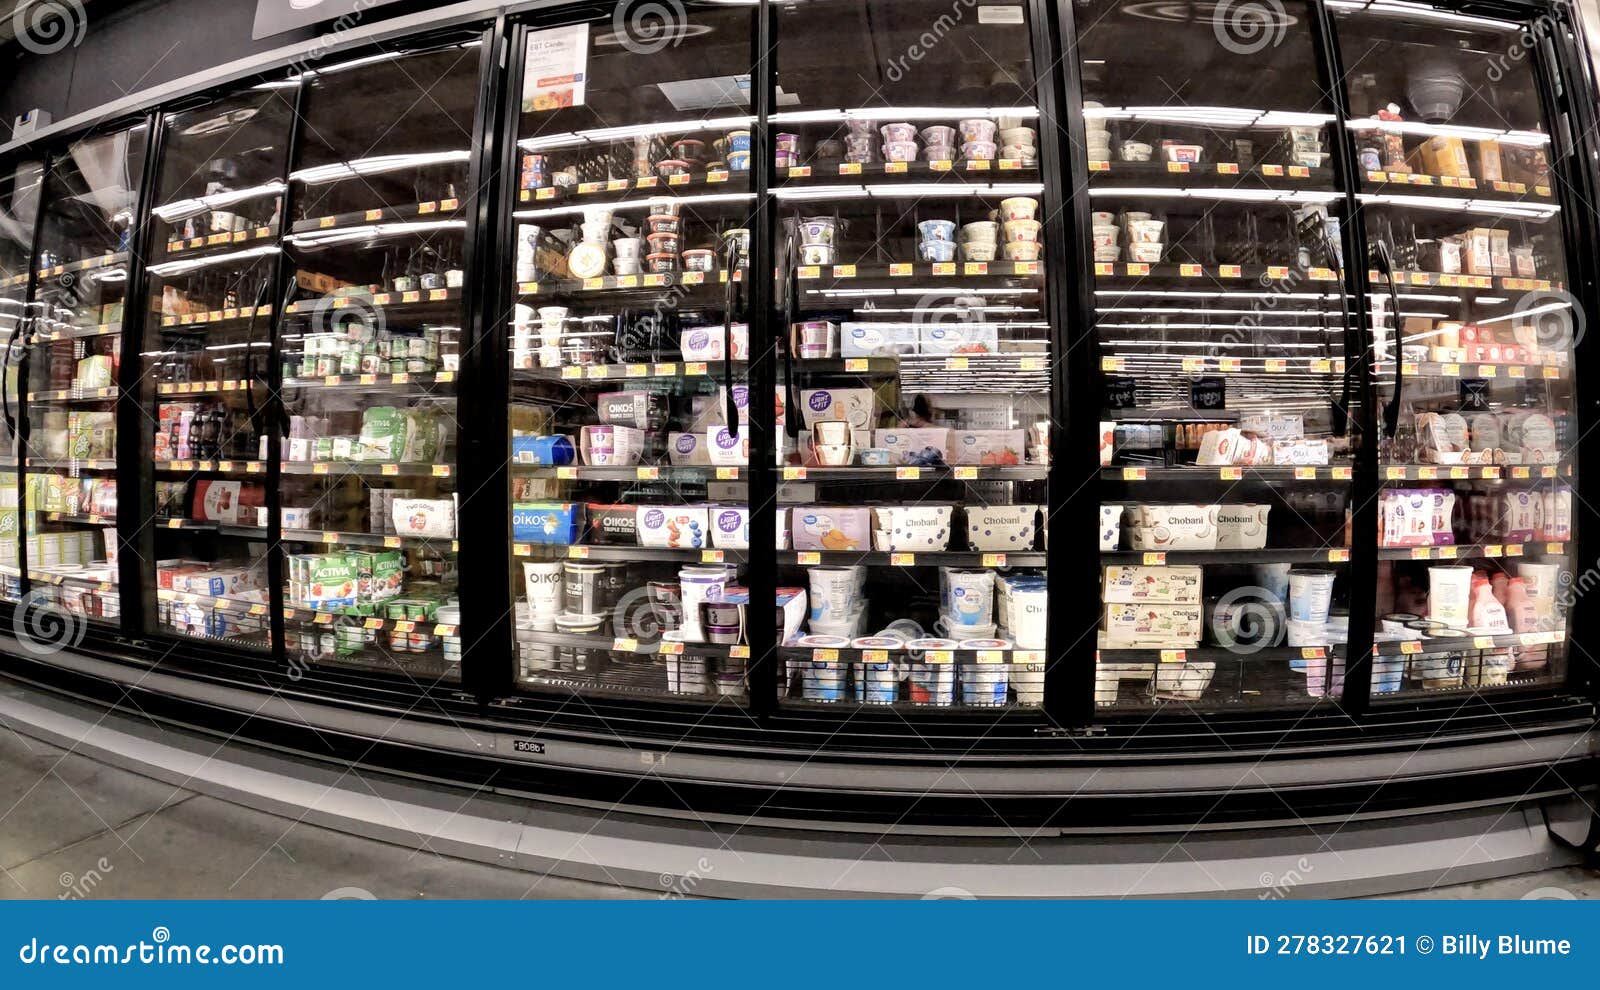 Walmart Grocery Store Interior Dairy Case Editorial Photo - Image of ...